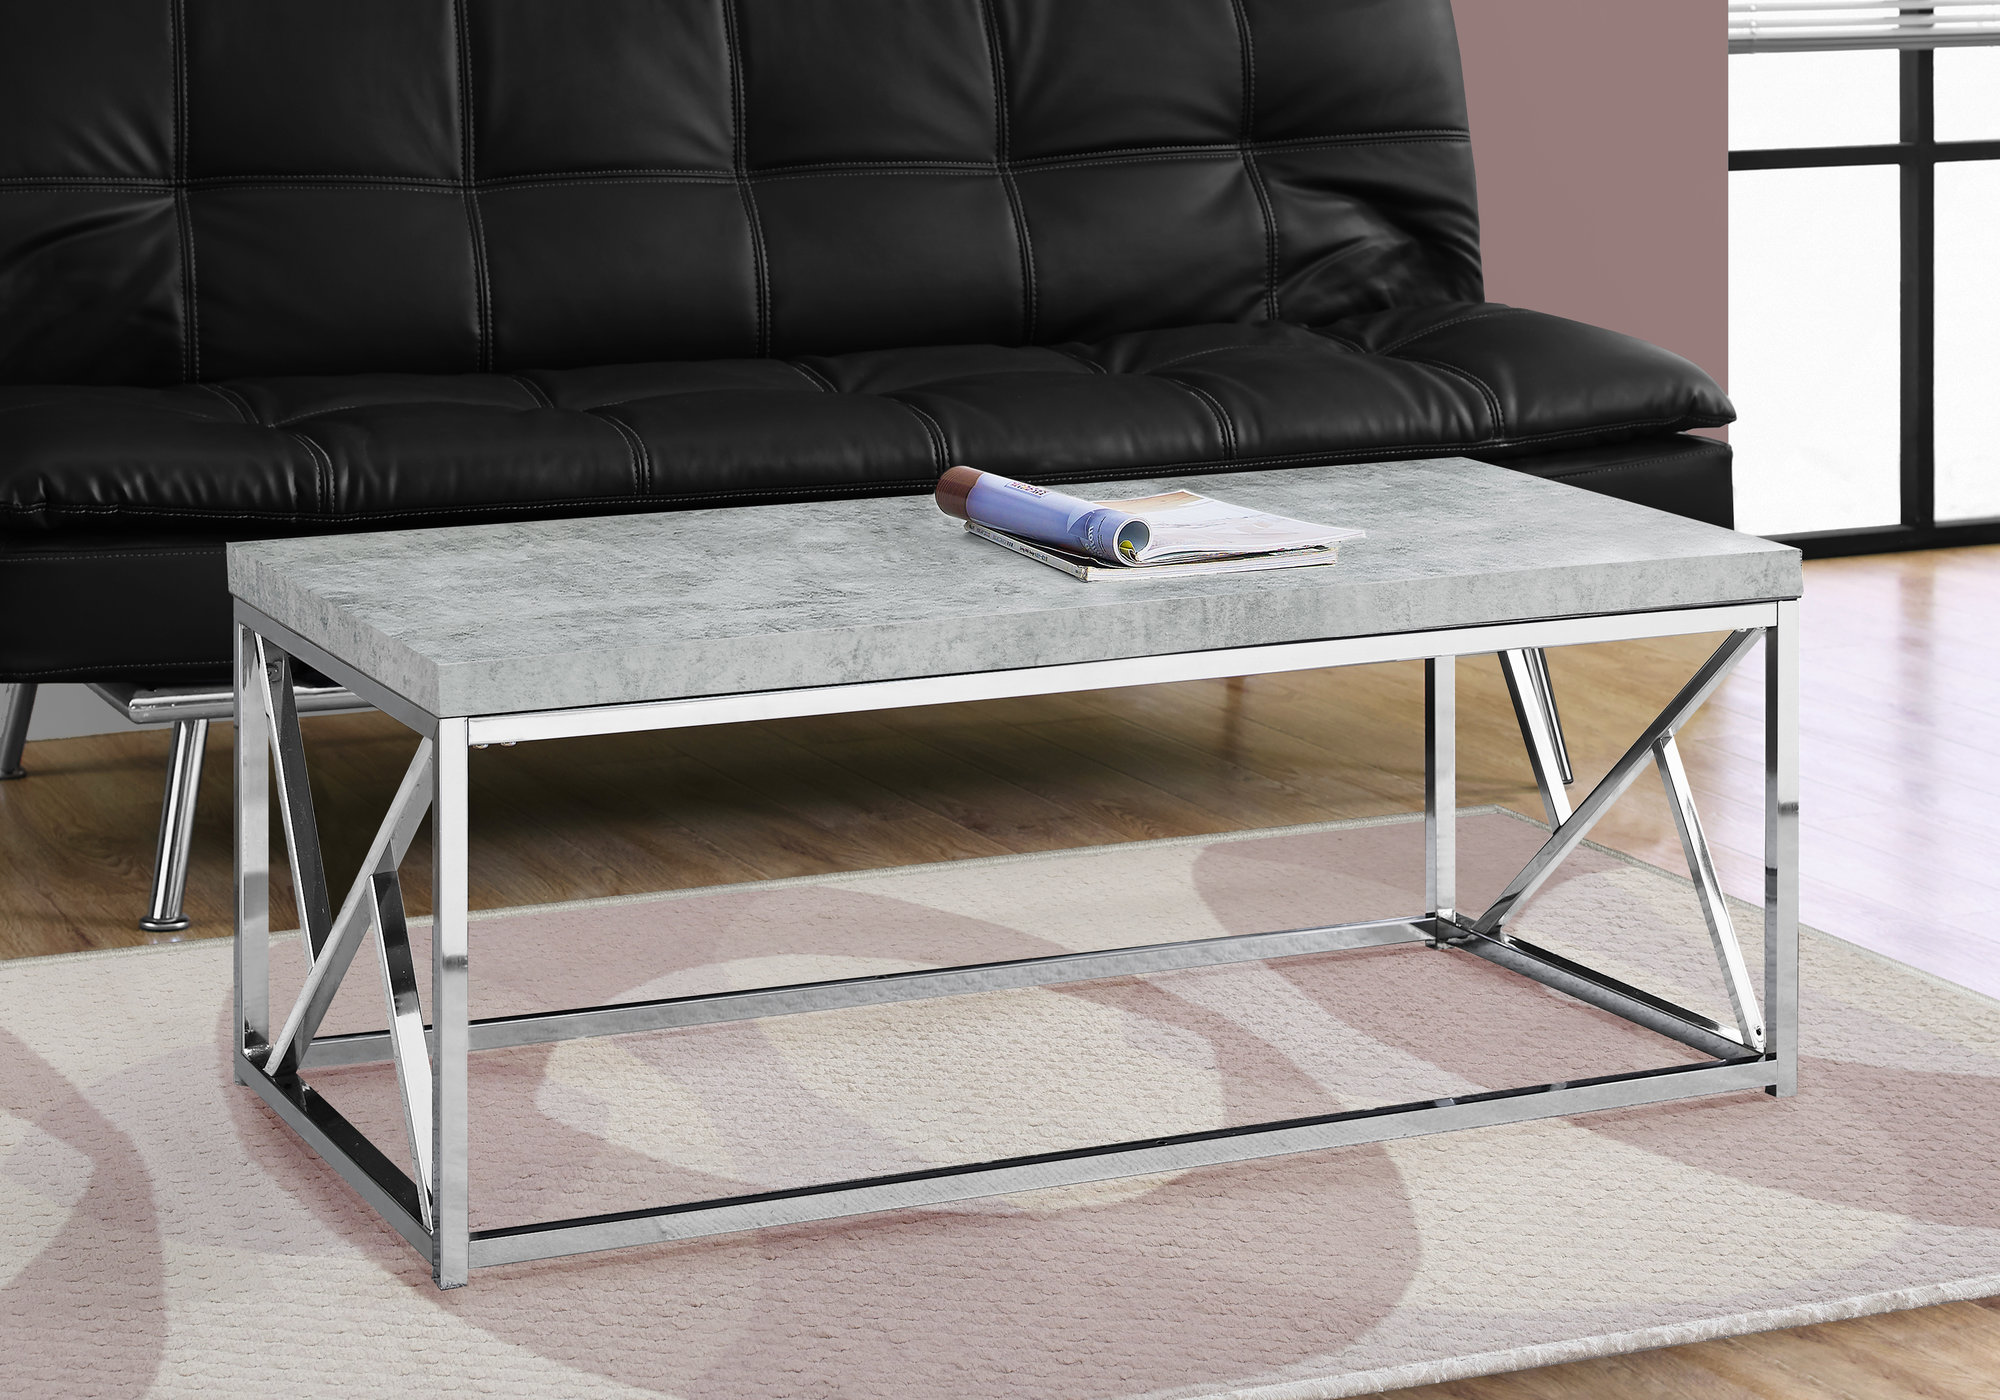 17" Grey Cement Particle Board Laminate and Chrome Metal Coffee Table